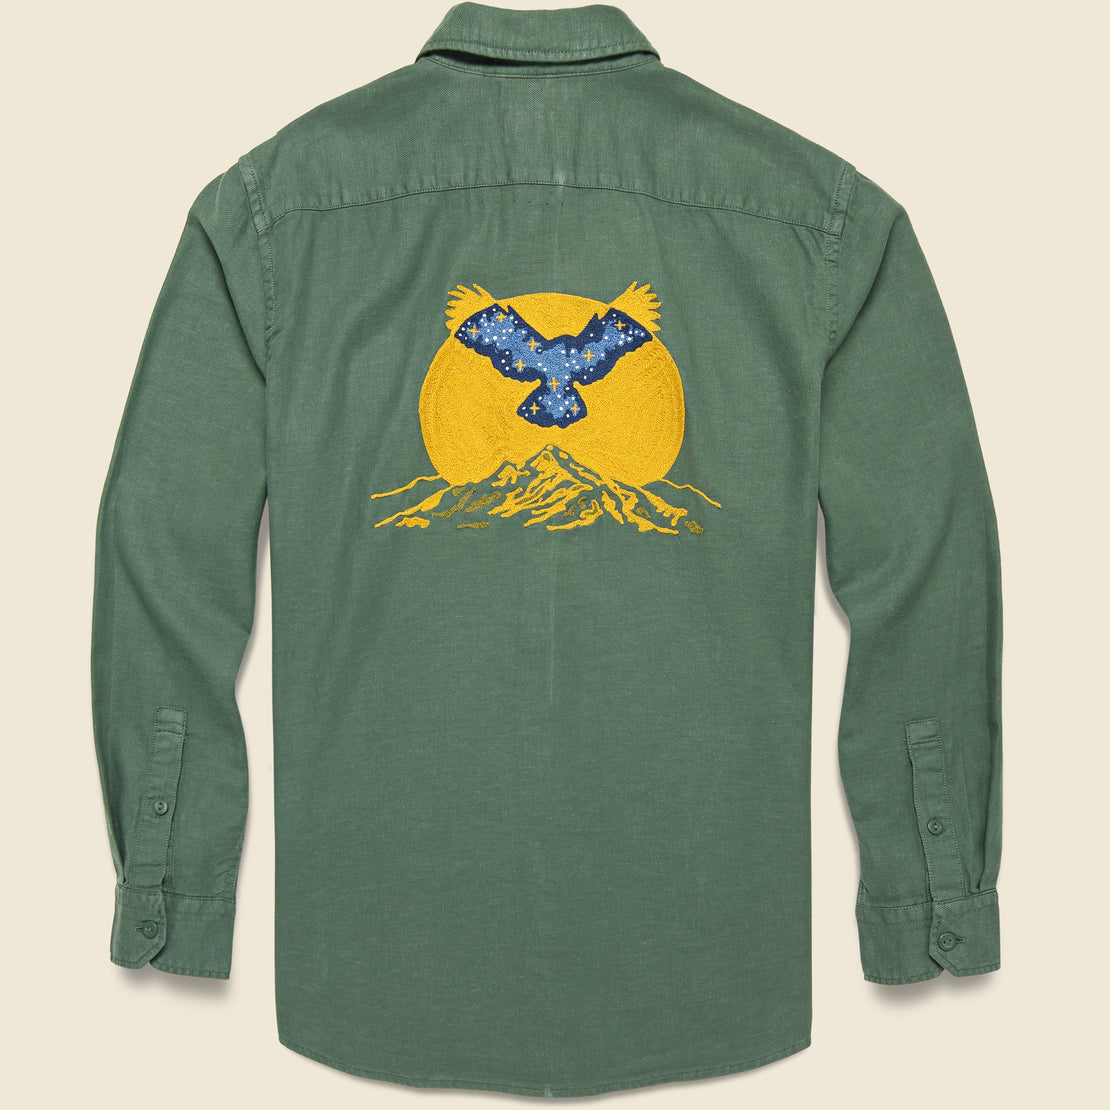 Fort Lonesome Jackson Worker Shirt - Flying Owl